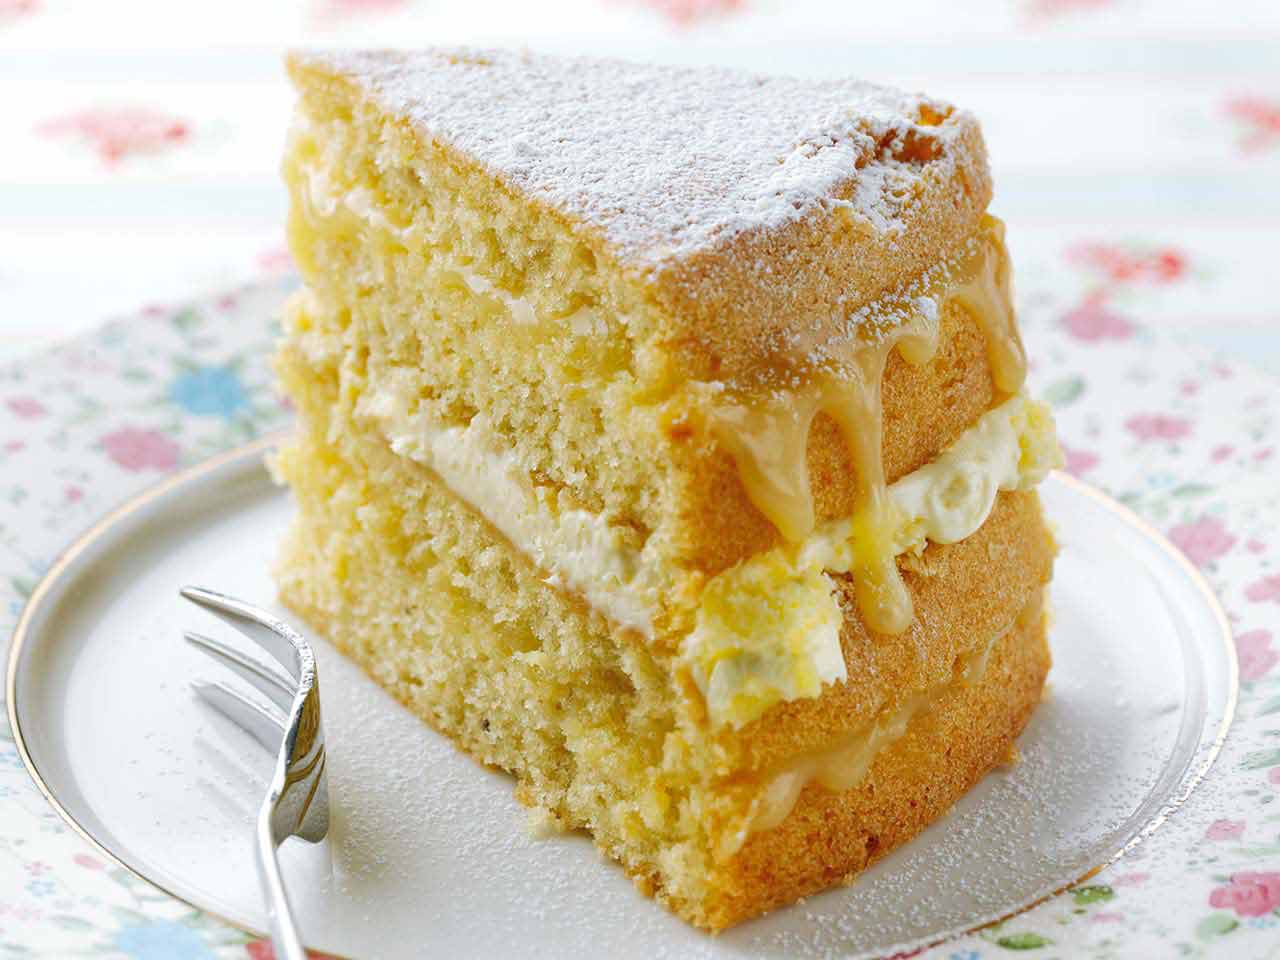 Lemon cake filled with clotted cream